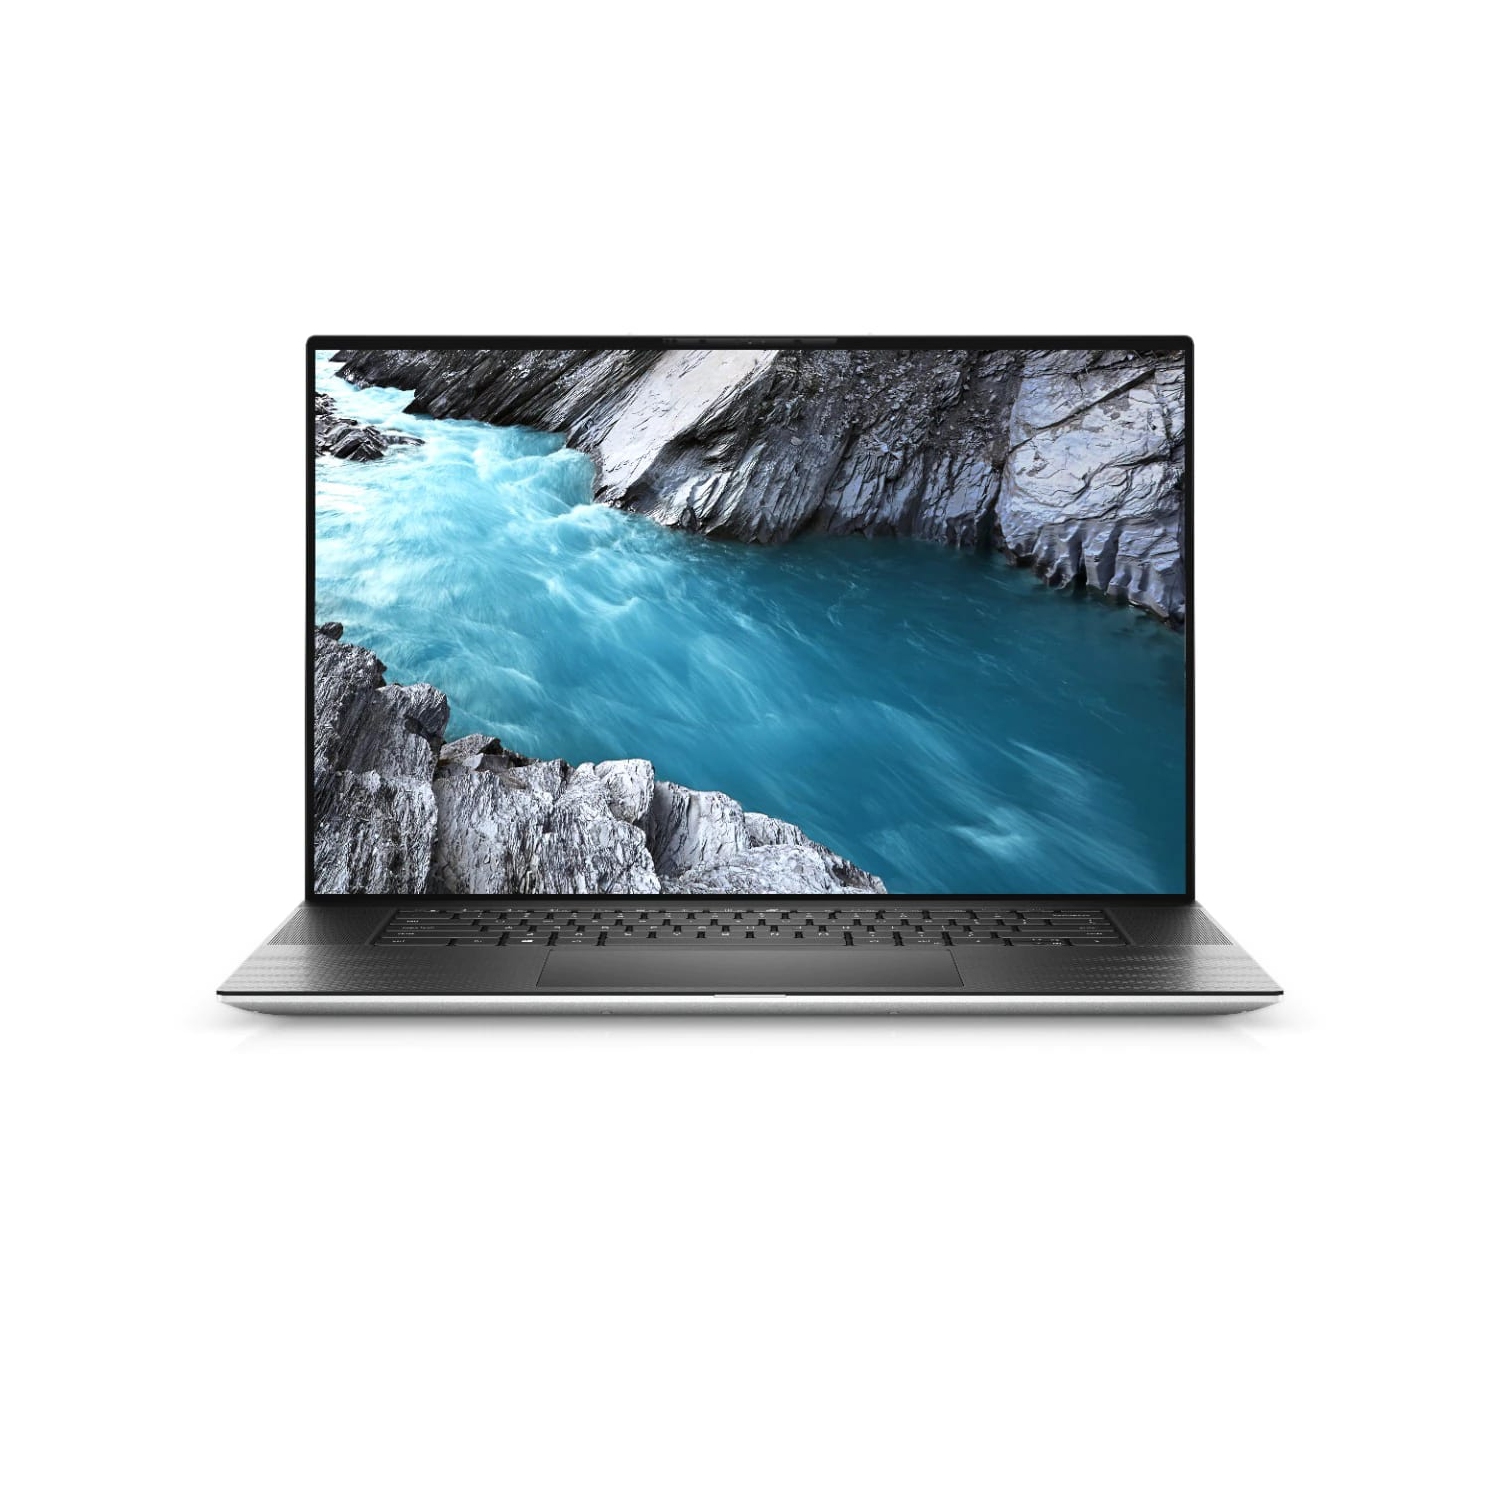 Refurbished (Excellent) - Dell XPS 17 9700 Laptop (2020) | 17" FHD+ | Core i9 - 1TB SSD - 64GB RAM - RTX 2060 | 8 Cores @ 5.3 GHz - 10th Gen CPU Certified Refurbished